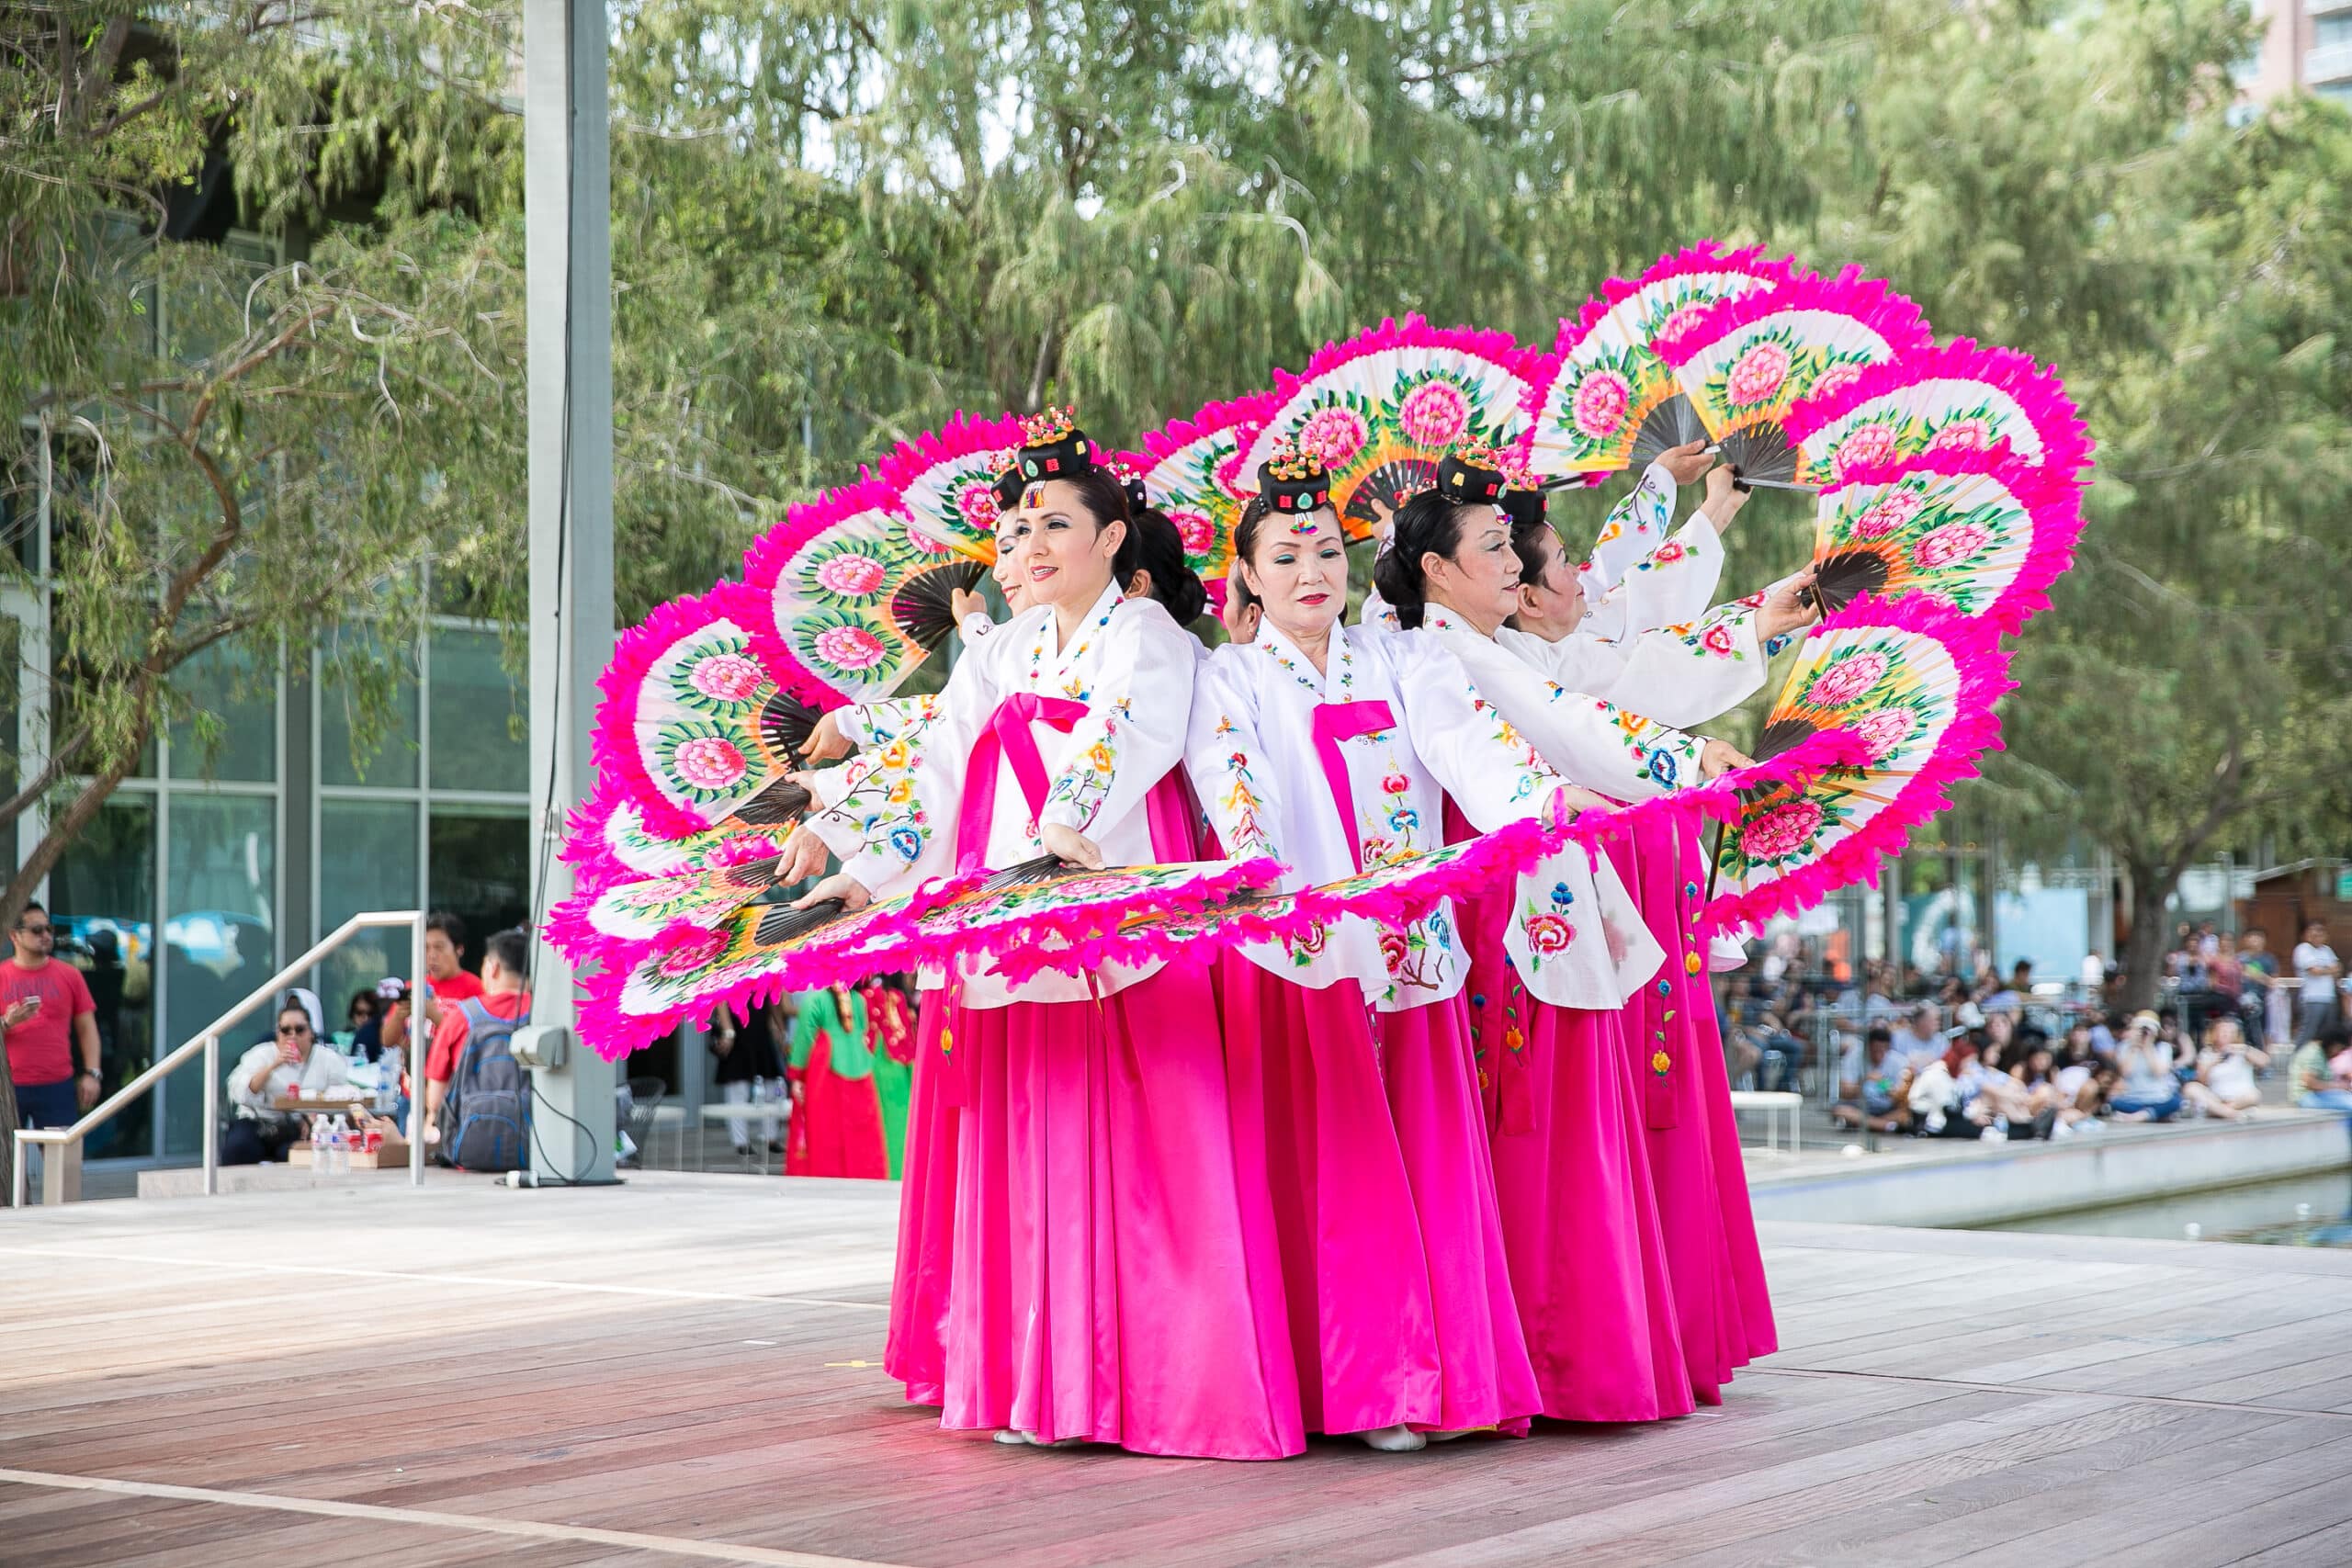 Women perform a traditional dance at the Korean Festival at Discovery Green